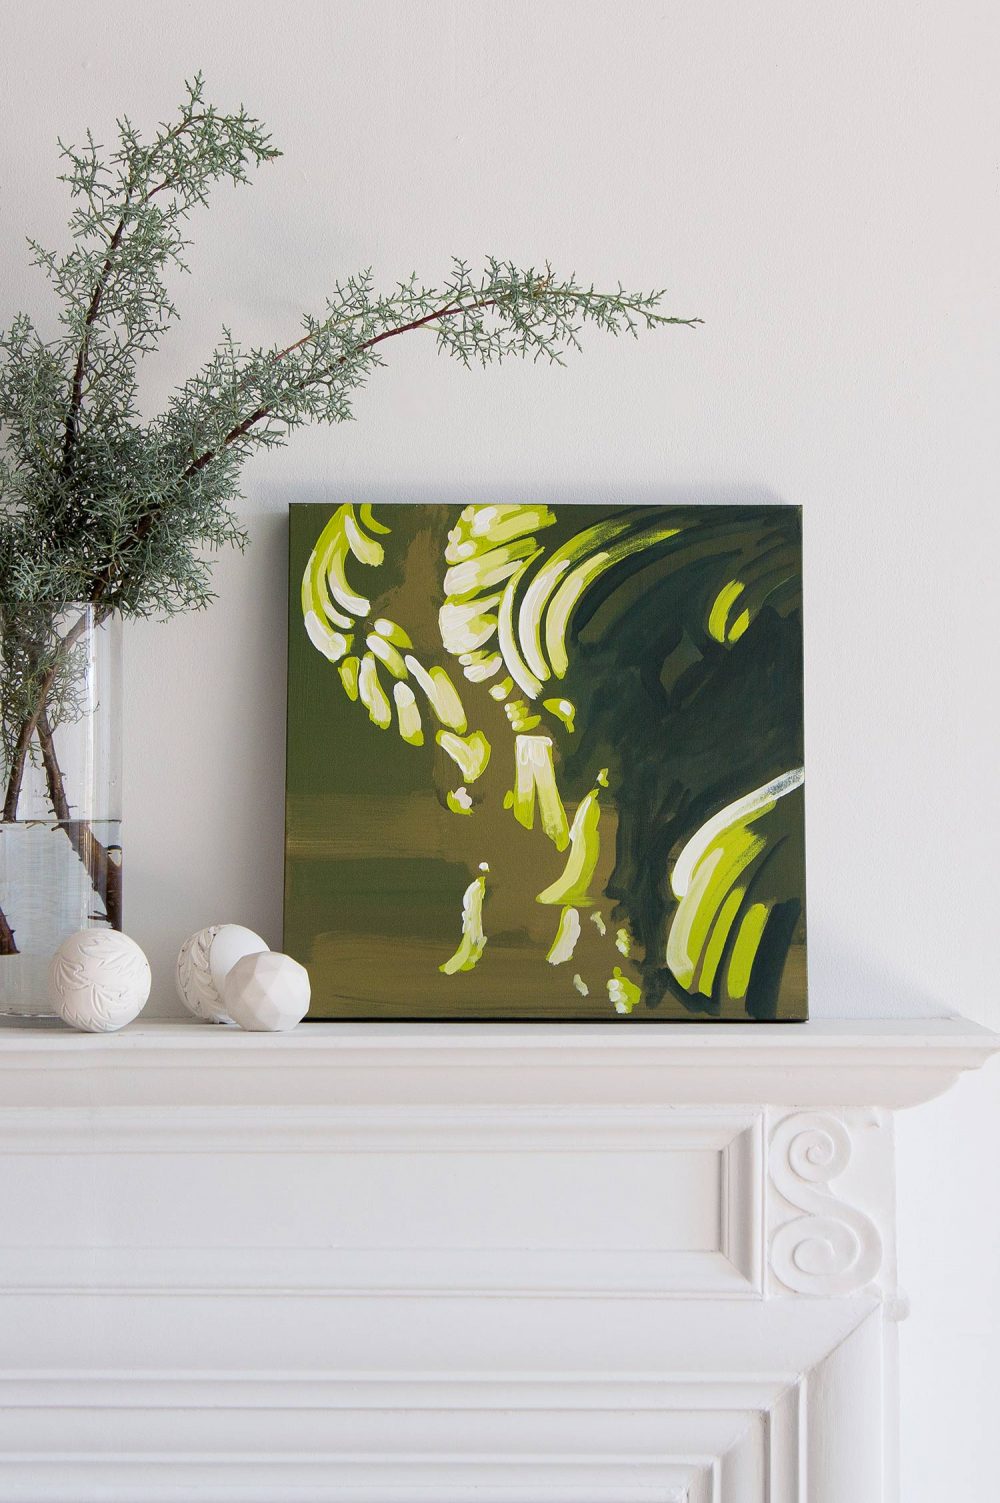 Flop Green Abstract Architectural Botanical Painting by Teale Hatheway installed in a living room